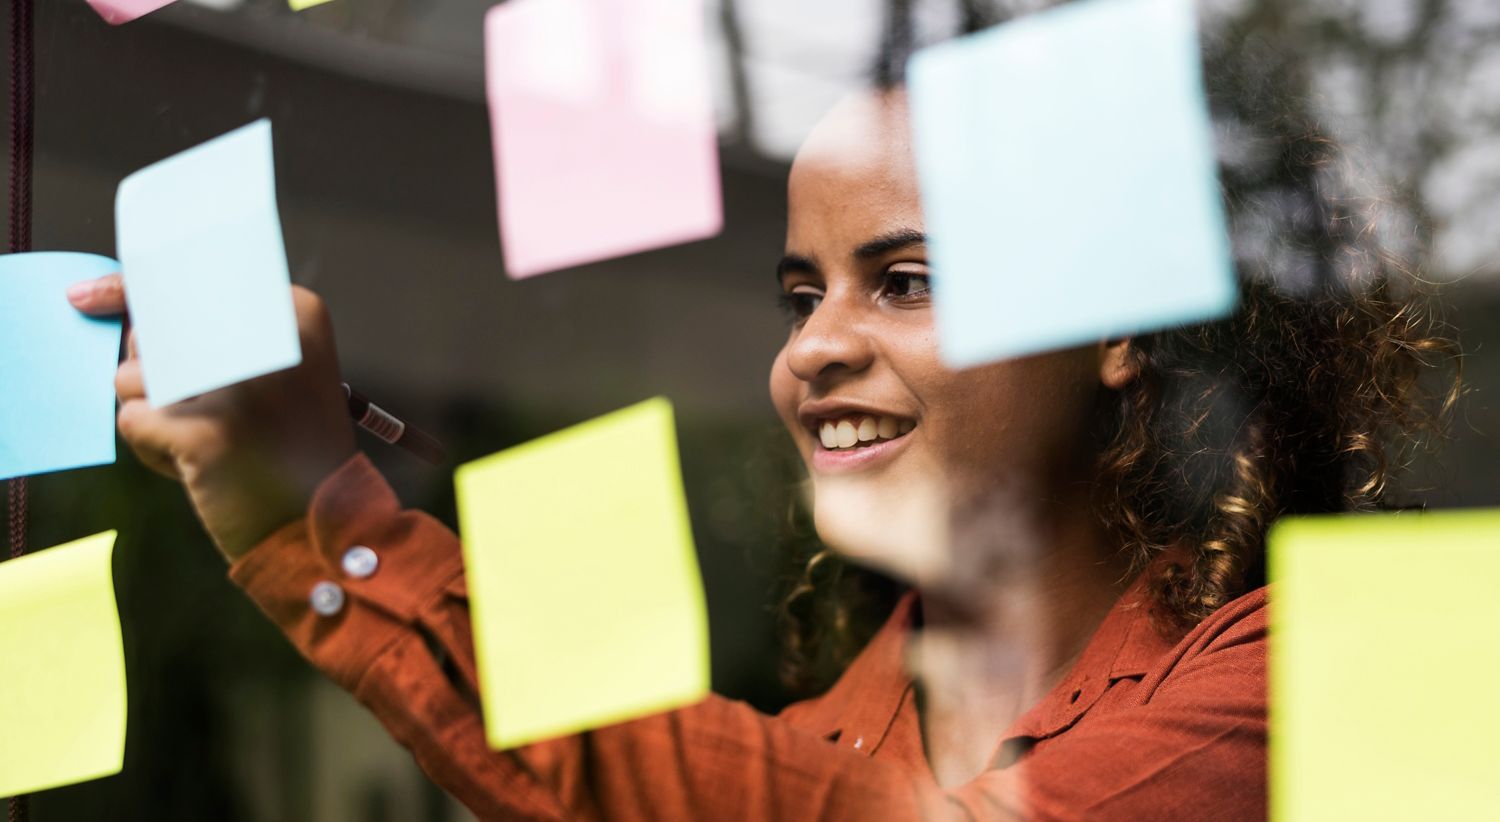 Woman hanging up Post-it notes. Photo.